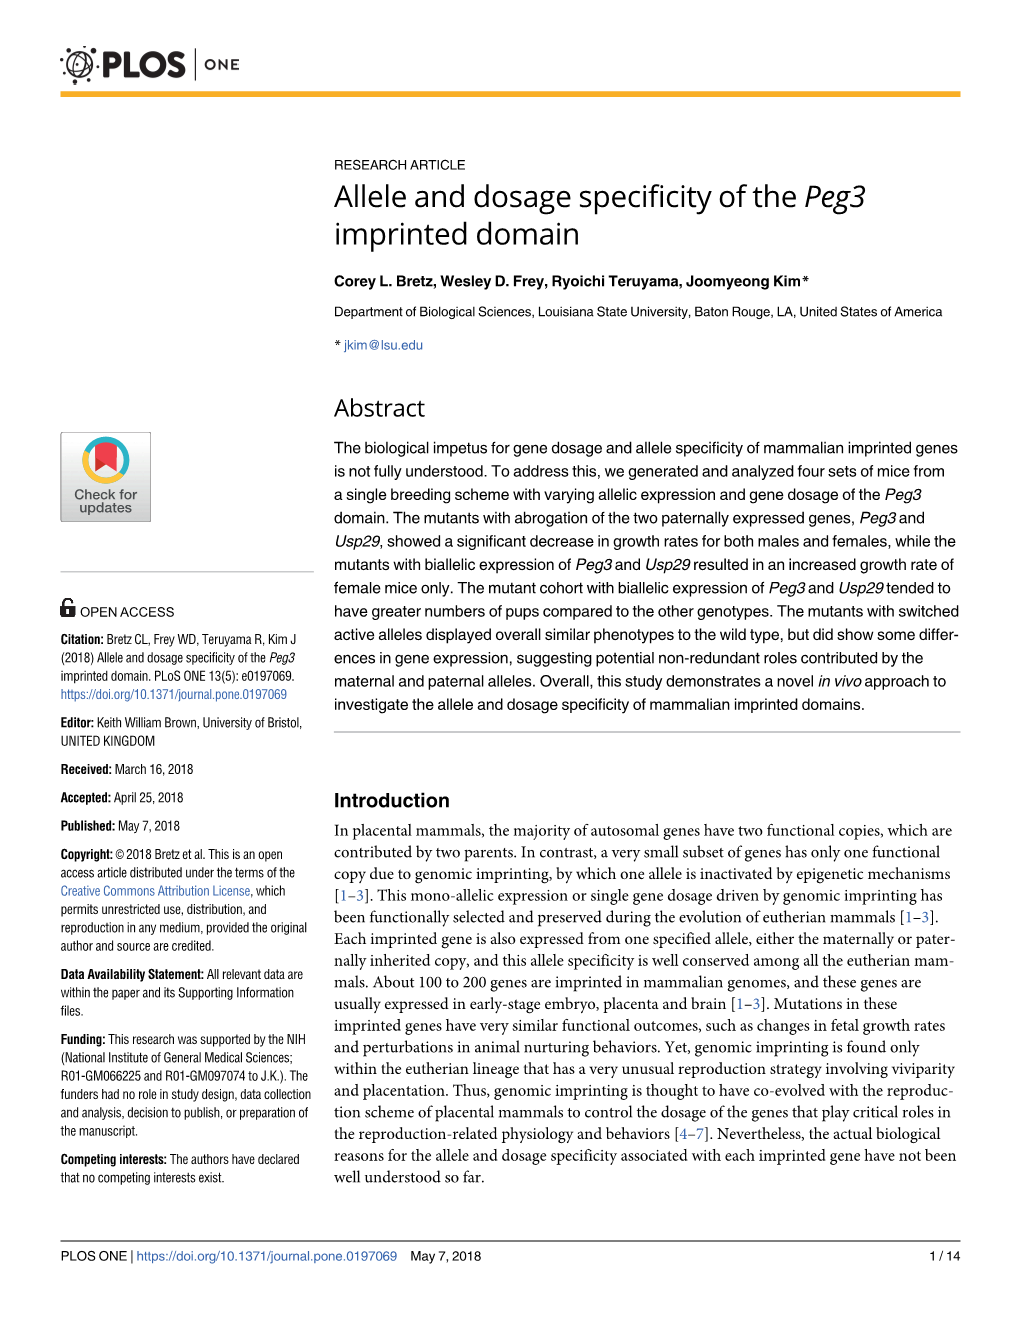 Allele and Dosage Specificity of the Peg3 Imprinted Domain